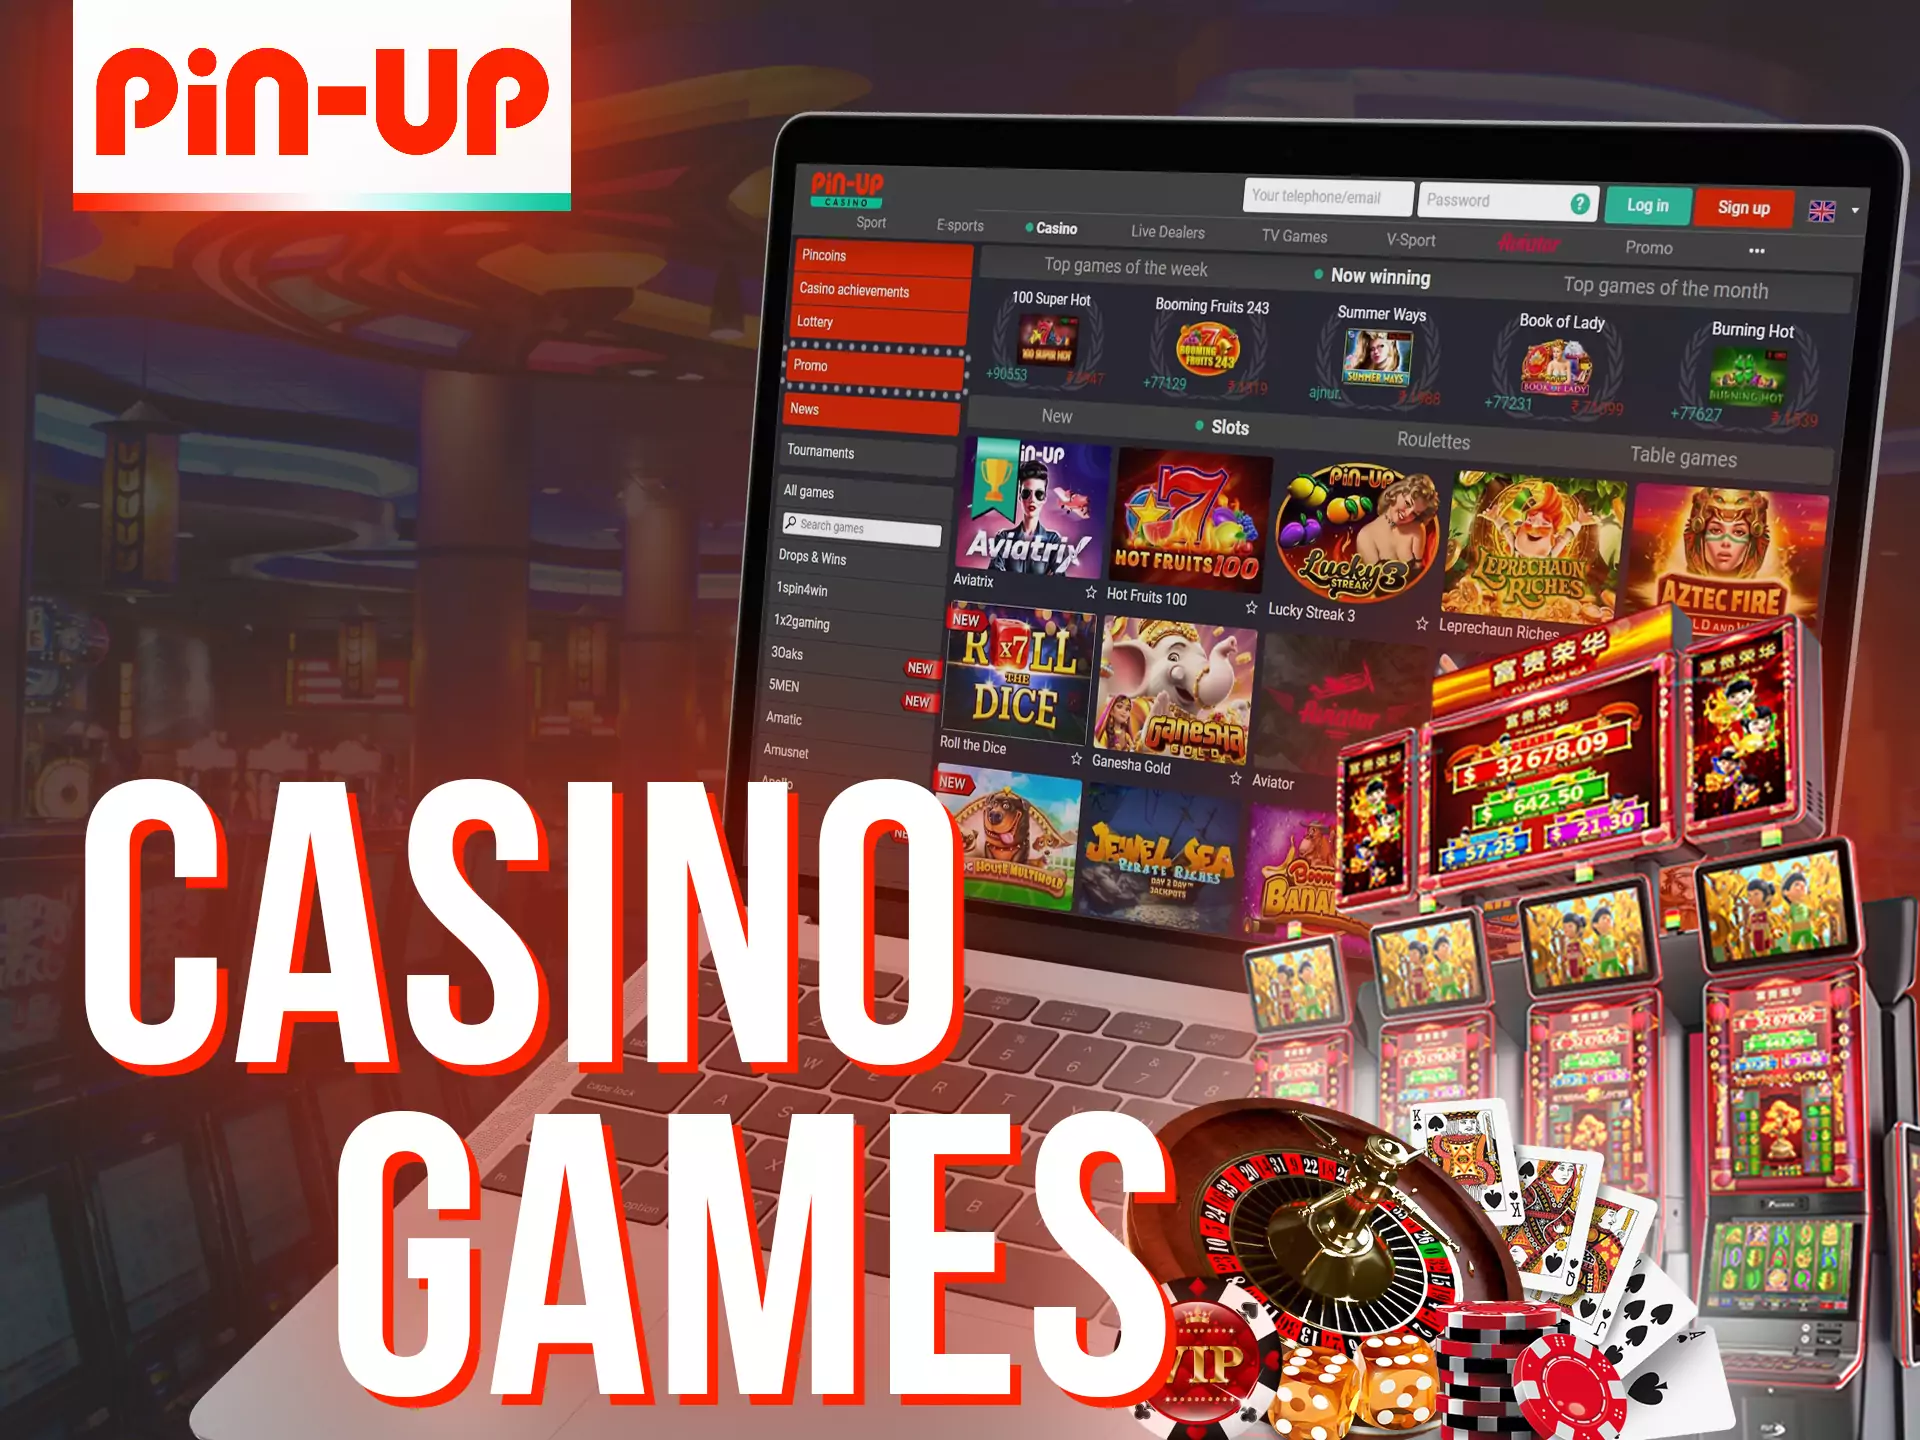 Play a variety of games in the Pin-up section of the casino.